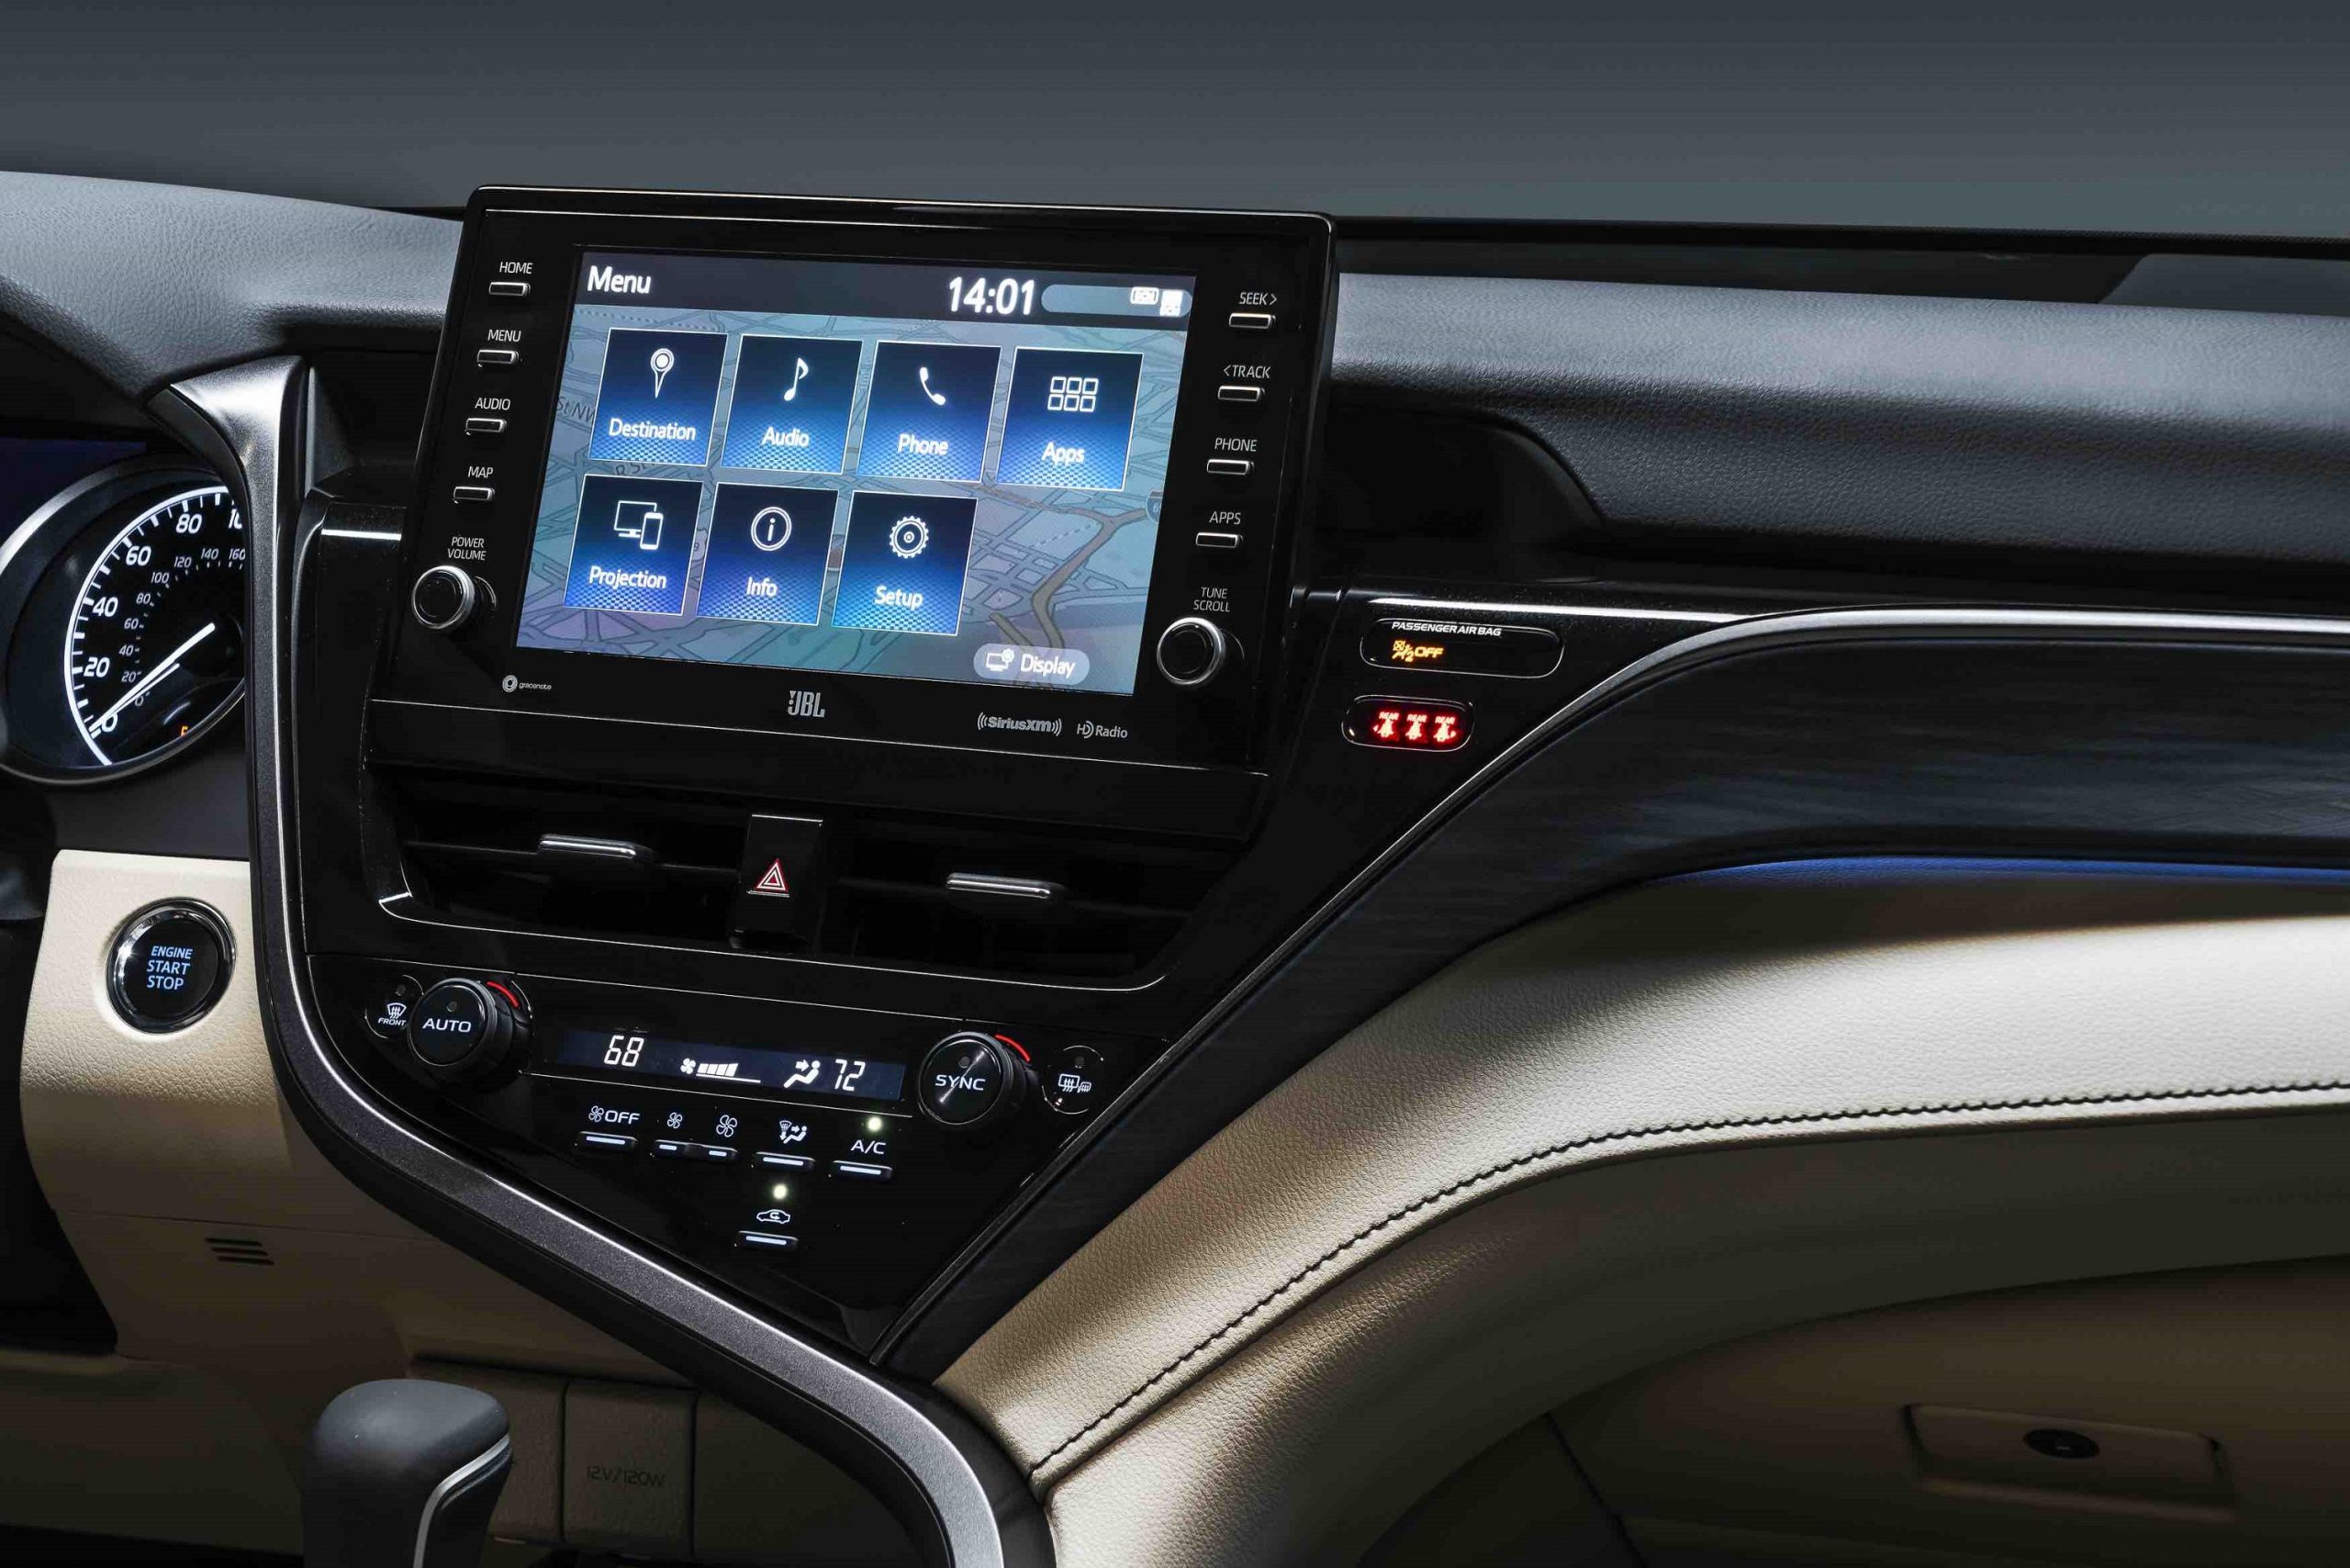 The infotainment system in the Camry's interior